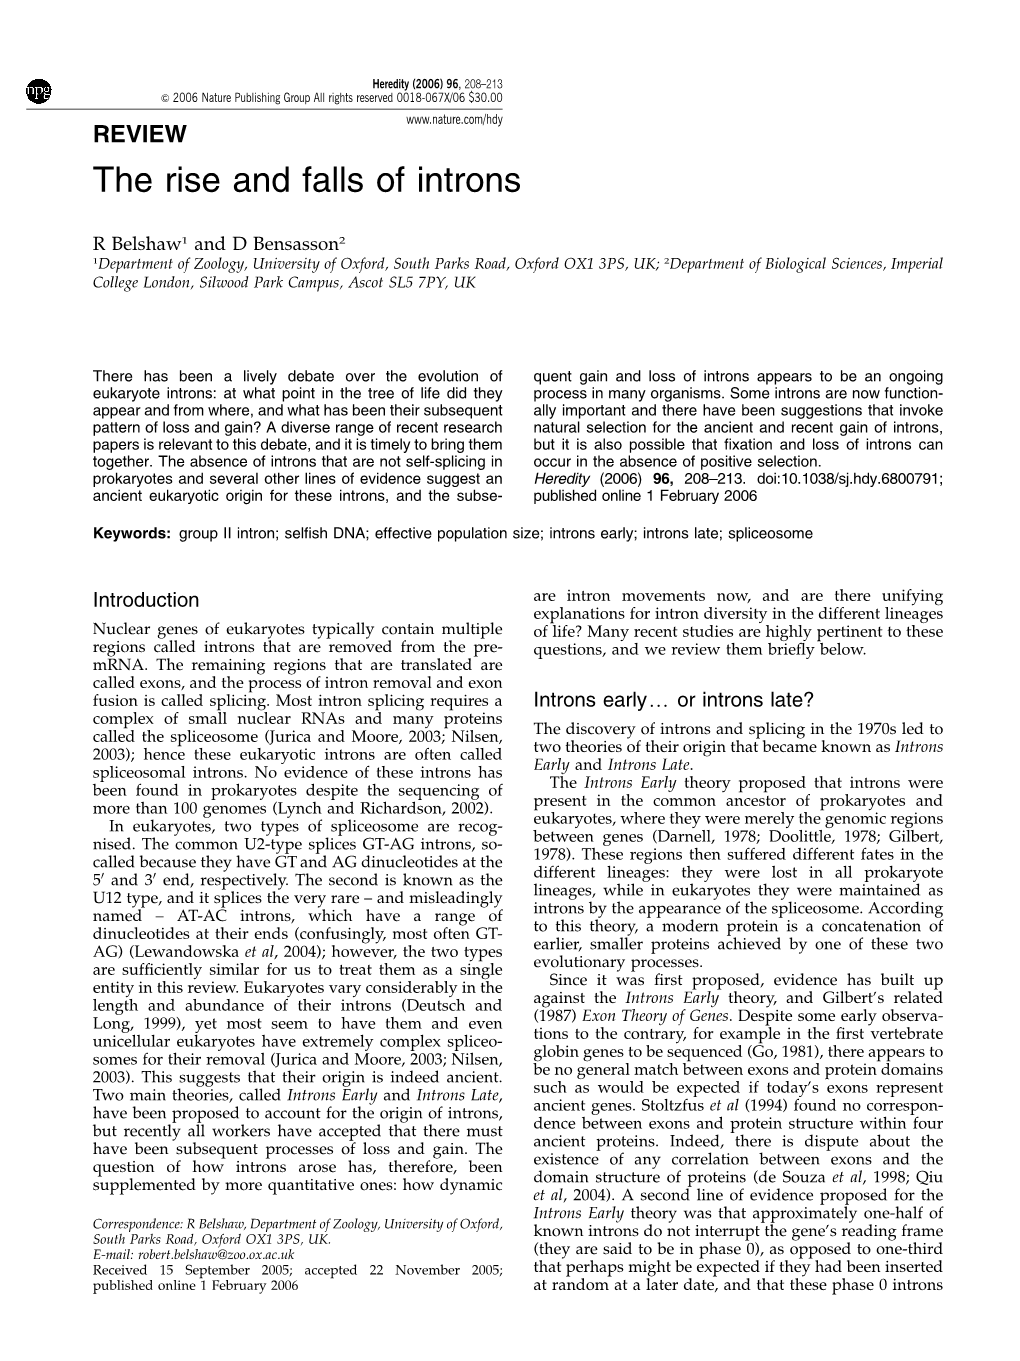 The Rise and Falls of Introns